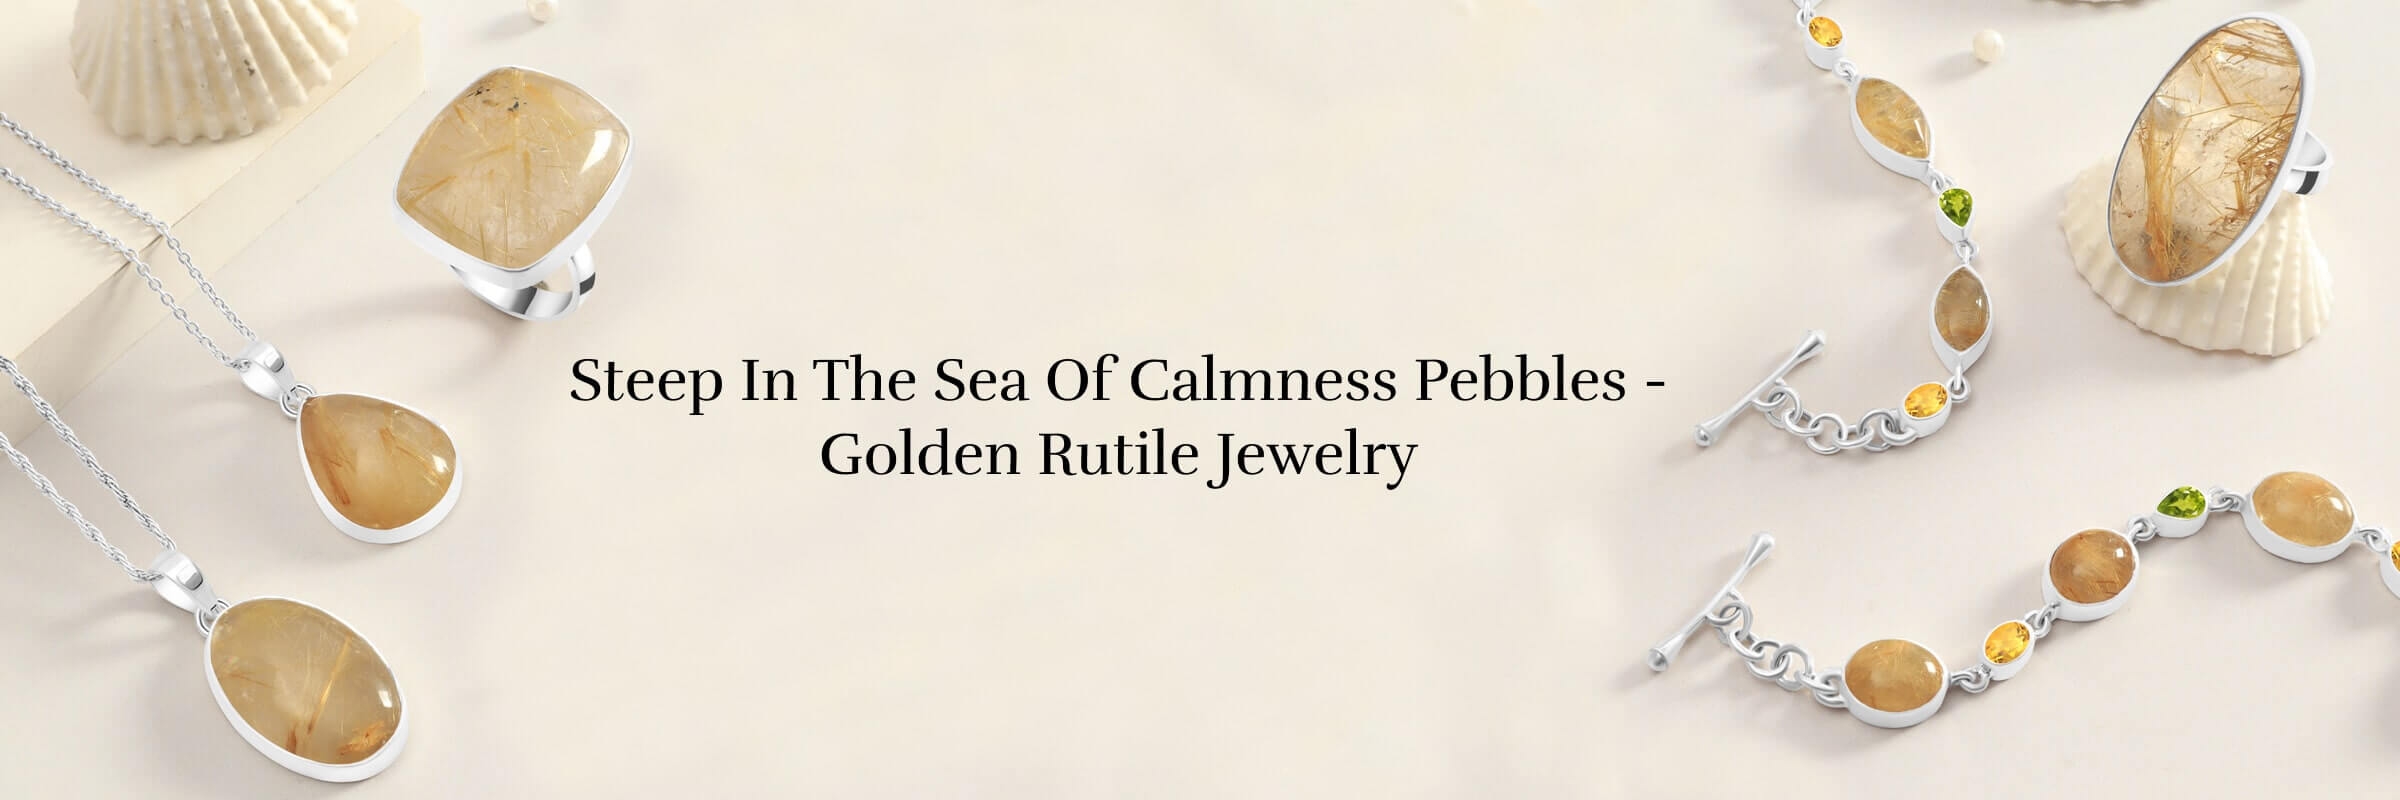 Golden Rutile Jewelry - A stone of Relieve